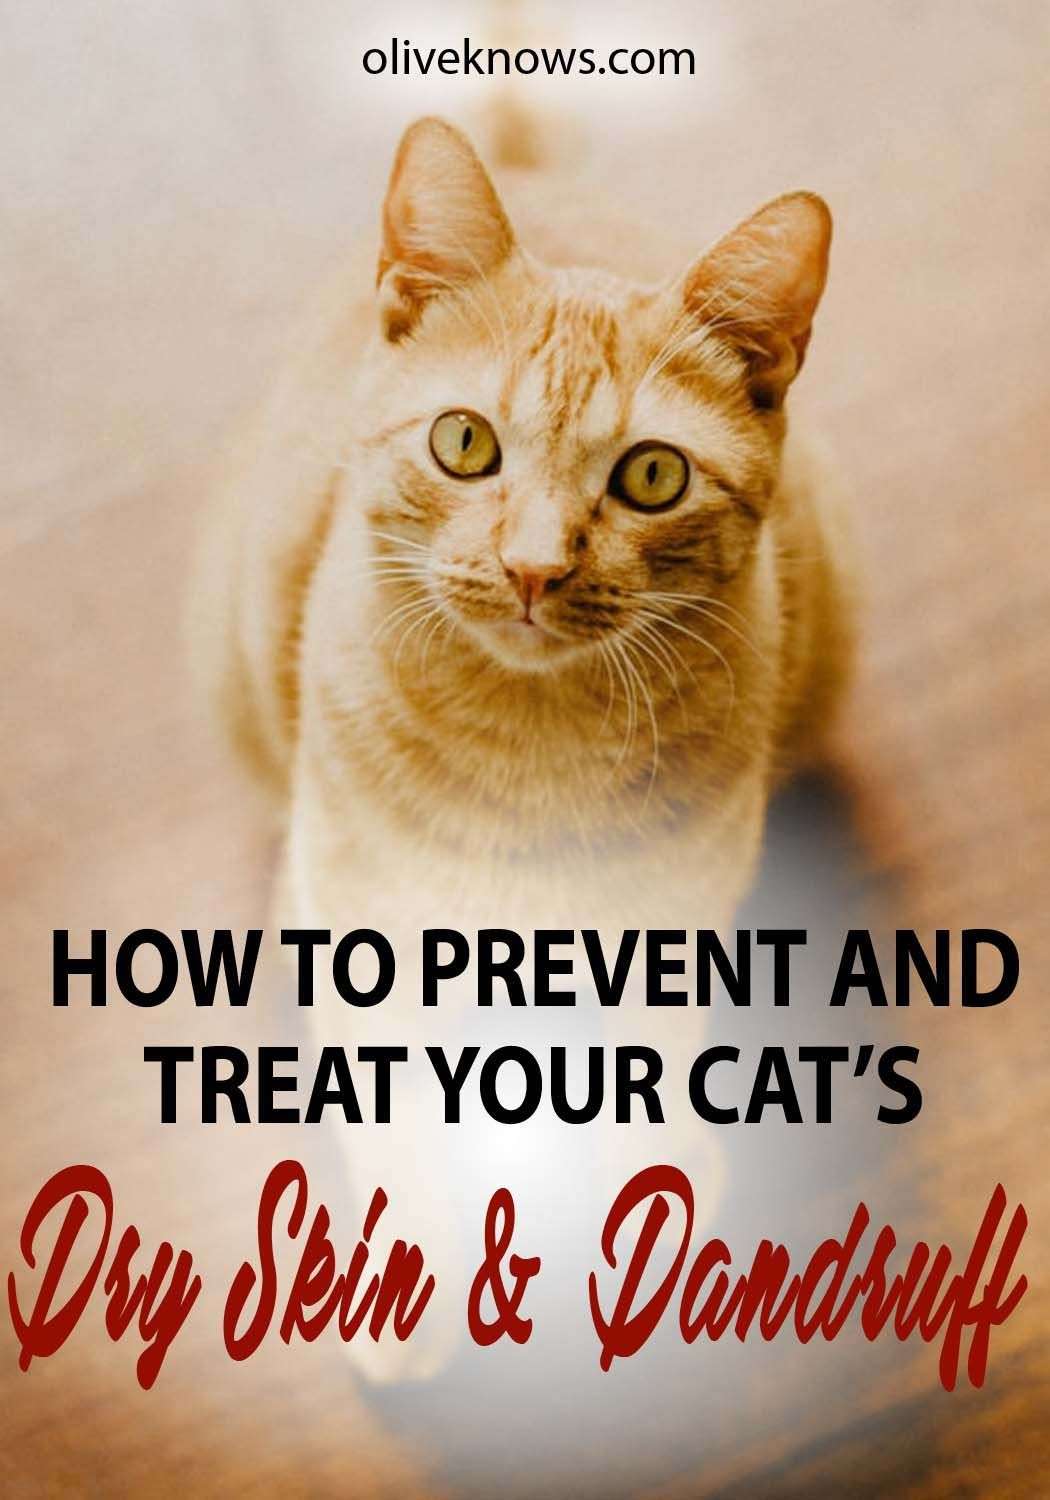 How to Prevent and Treat Your Cat